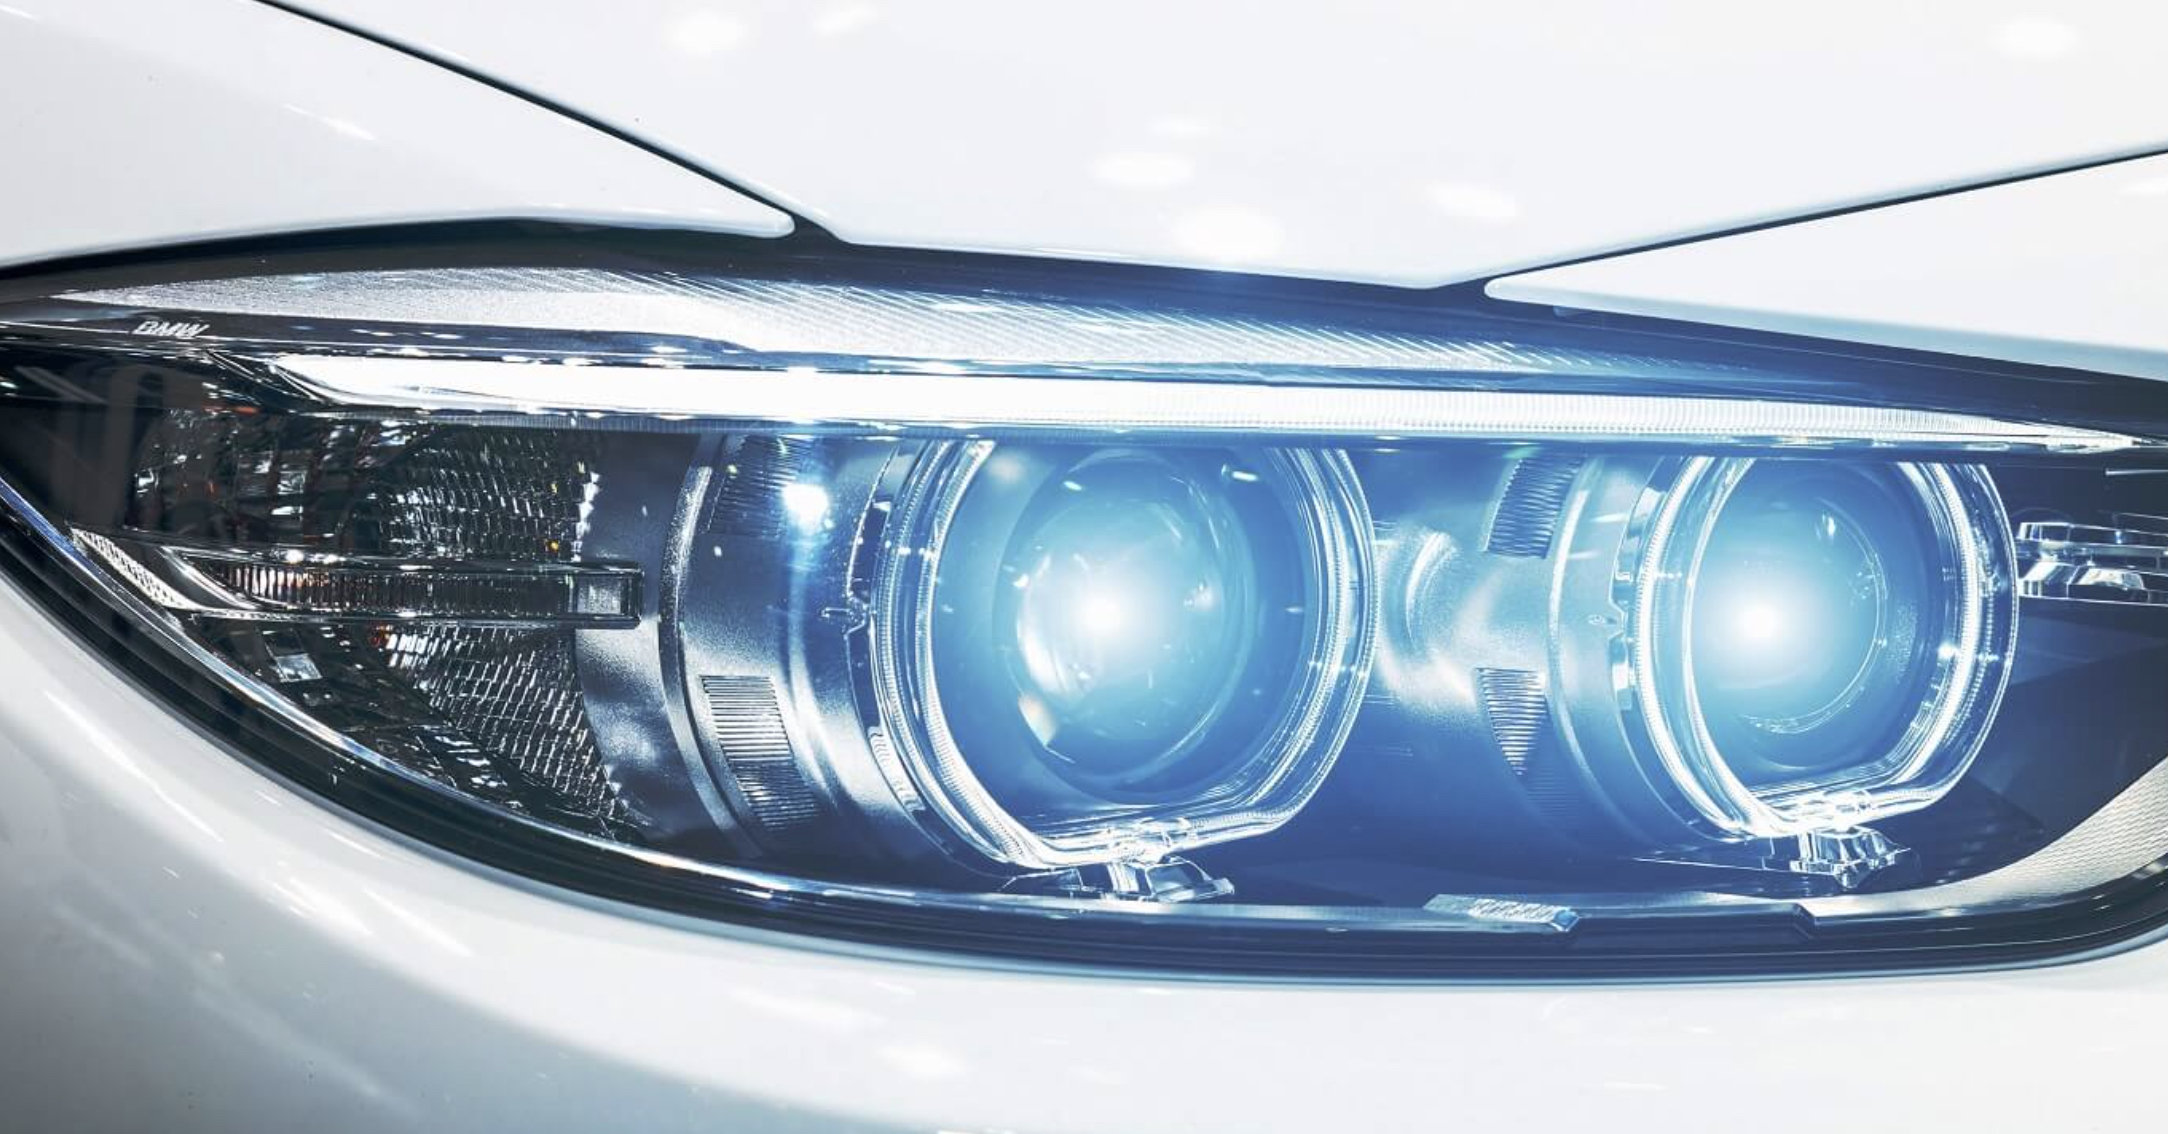 How Many Lumens Are In Car Headlights?